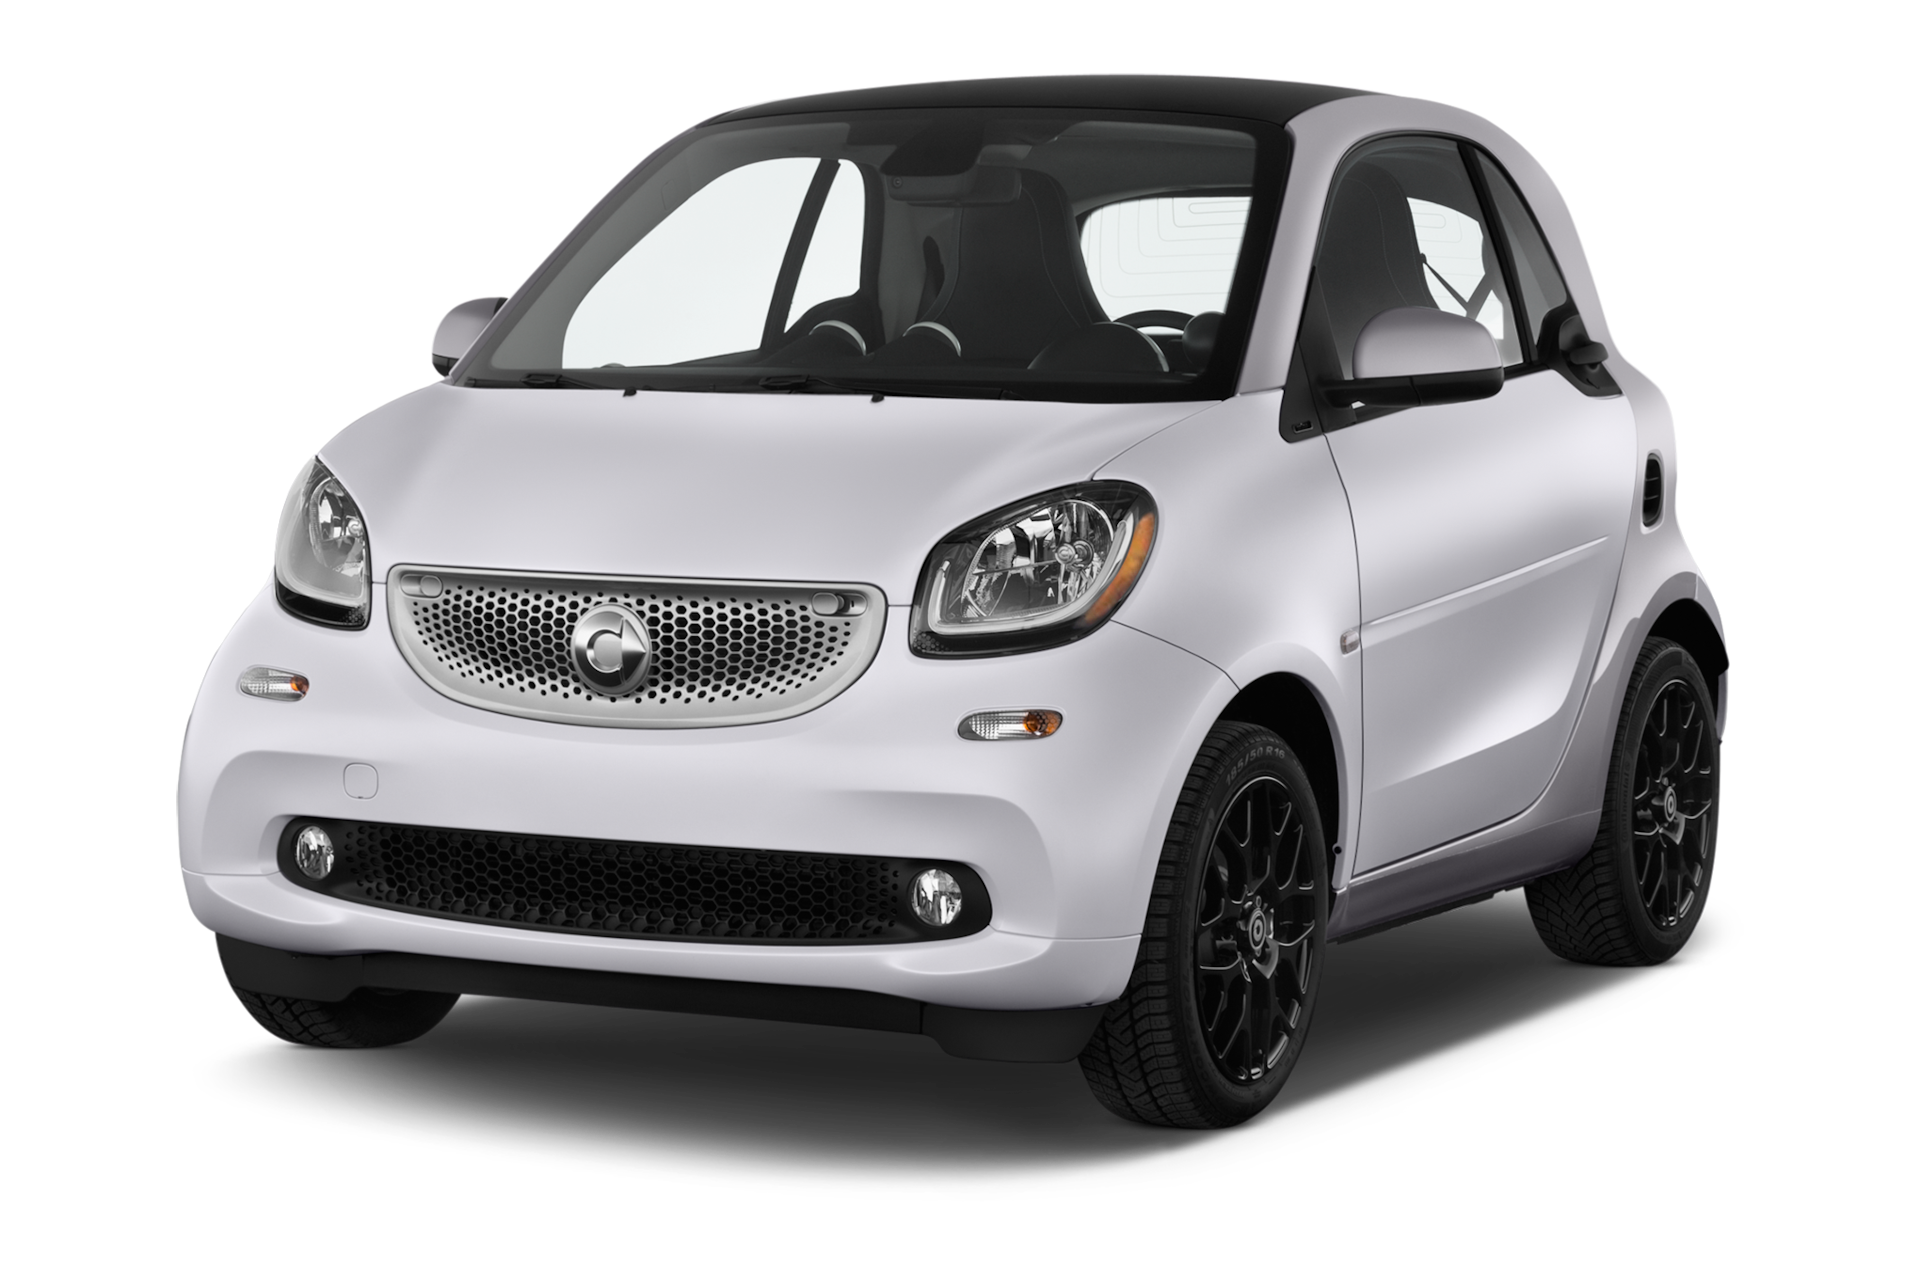 2017 Smart Fortwo Prices, Reviews, and Photos - MotorTrend